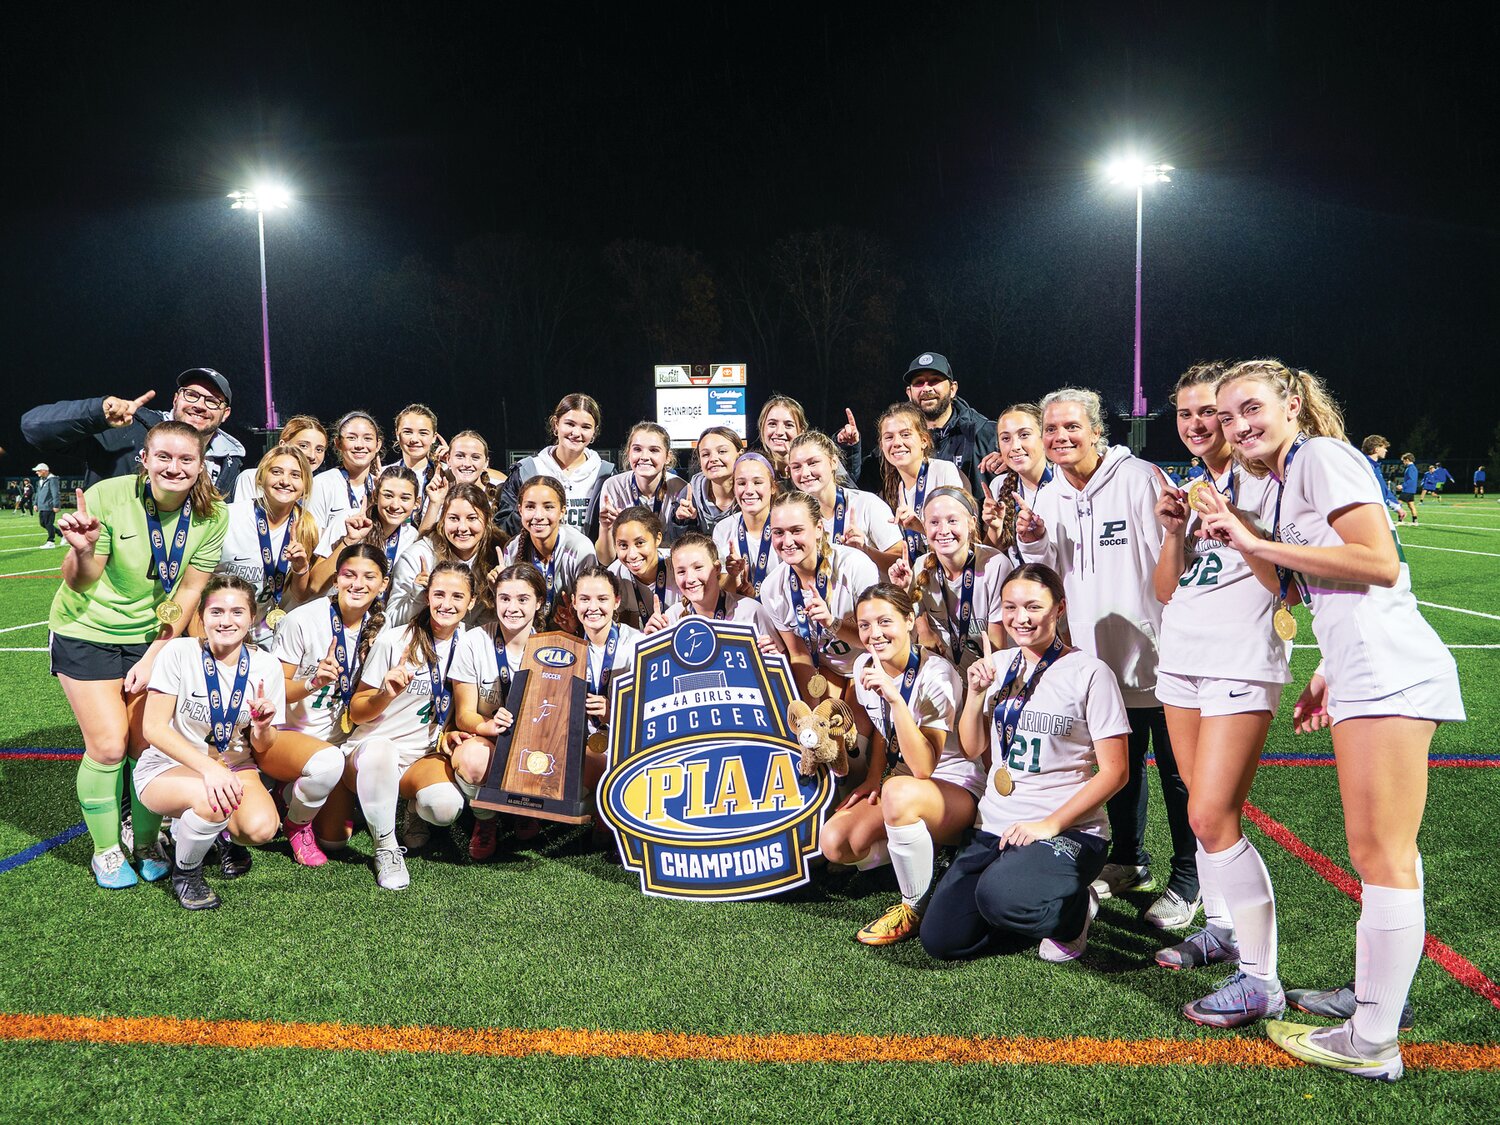 The Pennridge girls soccer team defeated Conestoga 4-1 Friday for the PIAA Class 4A soccer championship.